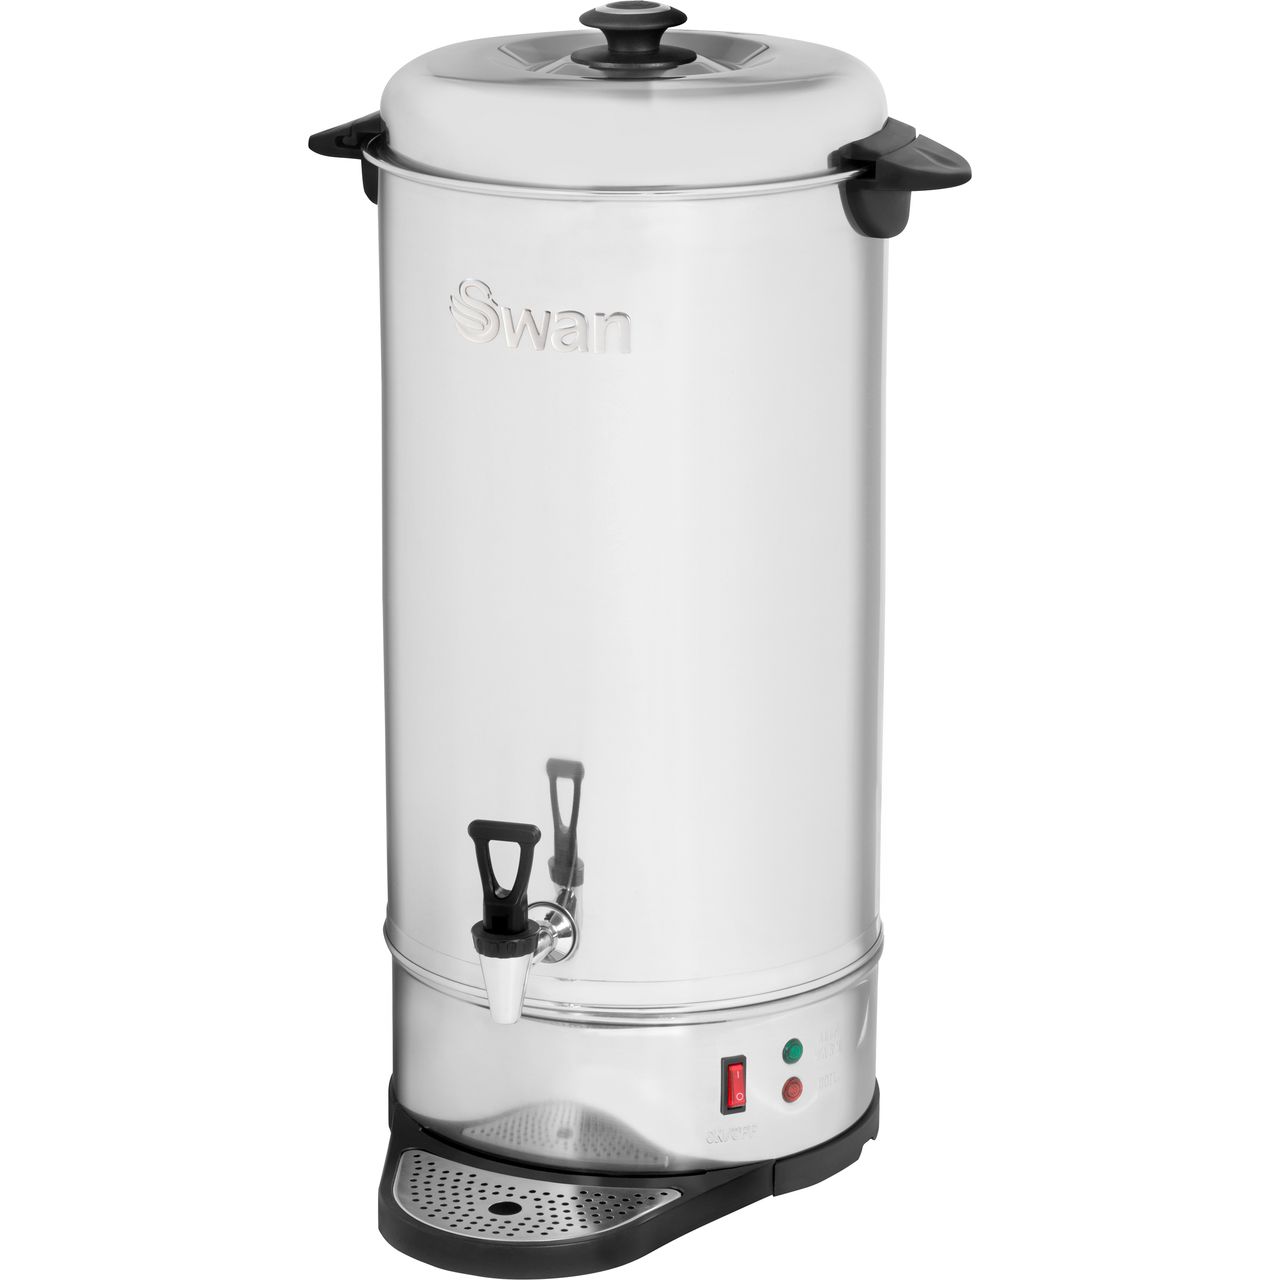 Swan SWU26L Commercial Hot Water Dispenser Review